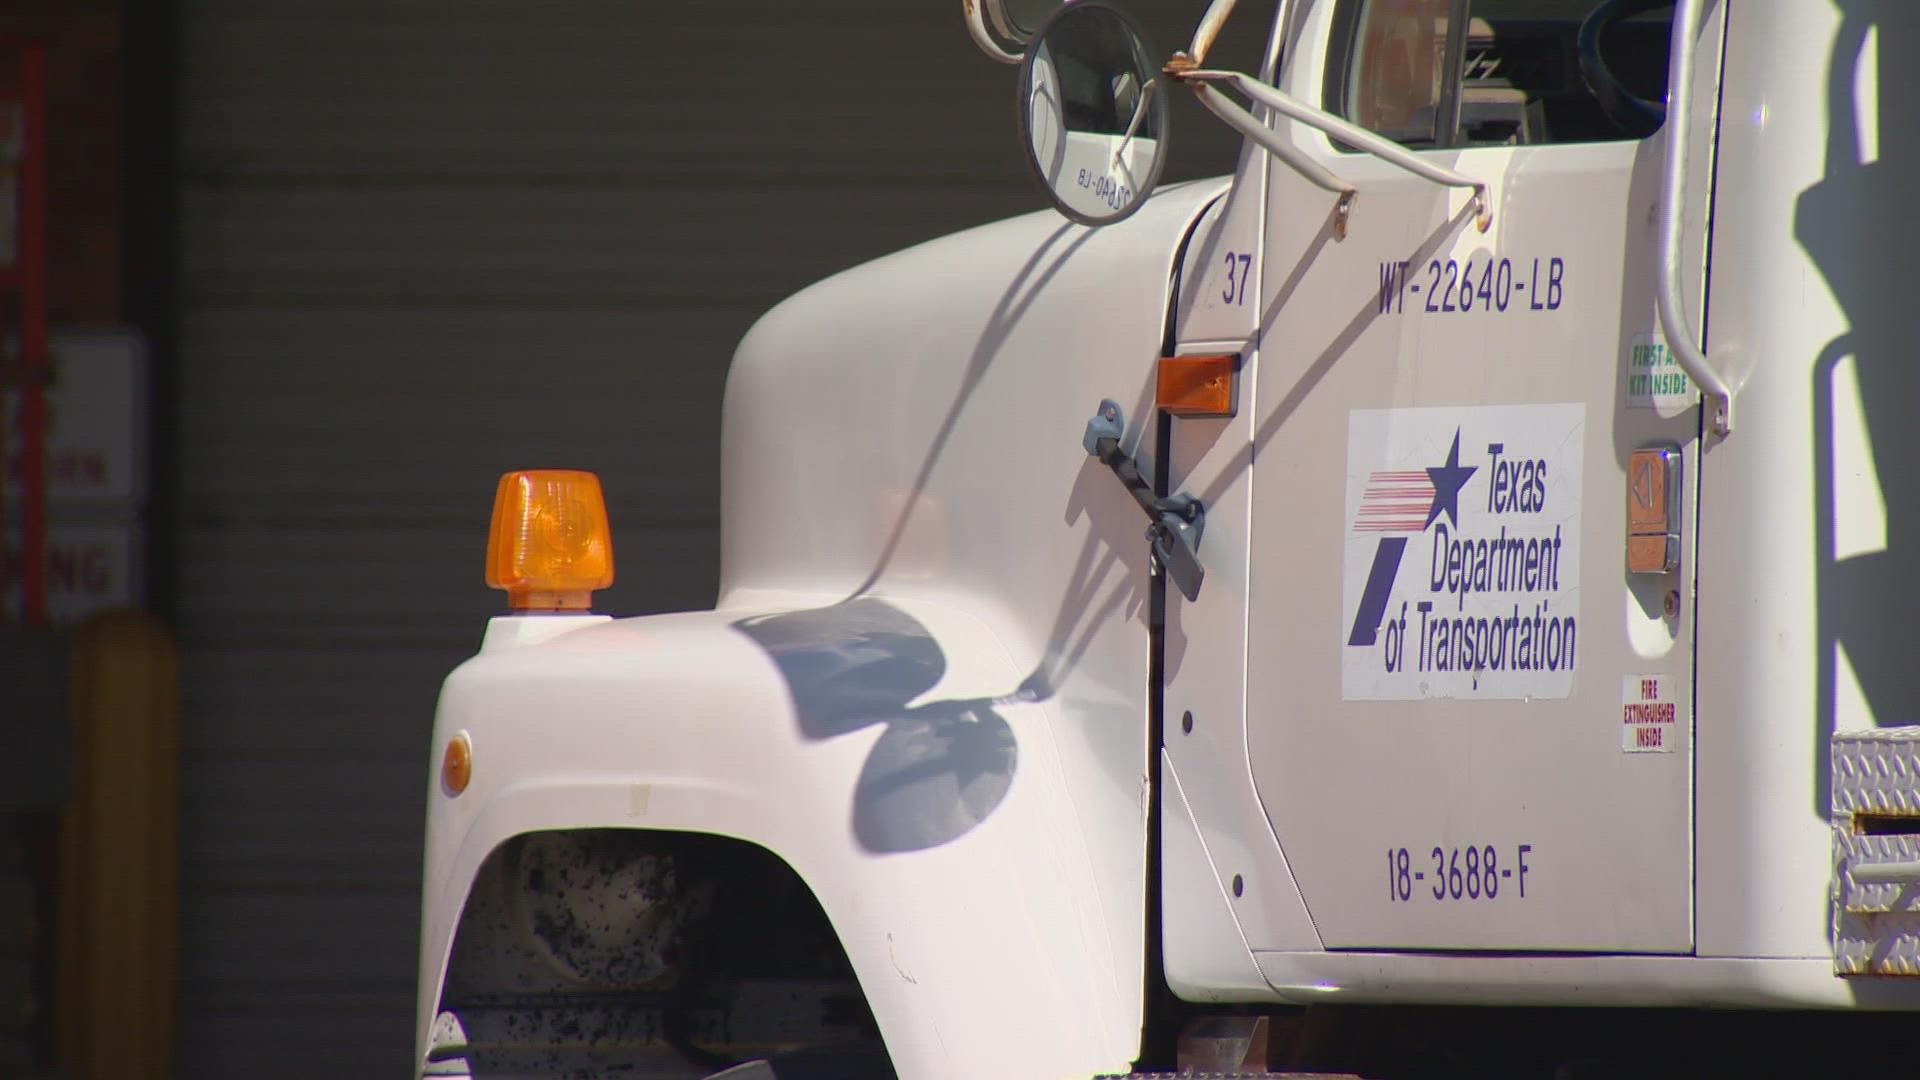 TxDOT officials said Sunday that crews will start pretreating the roads on Monday afternoon.